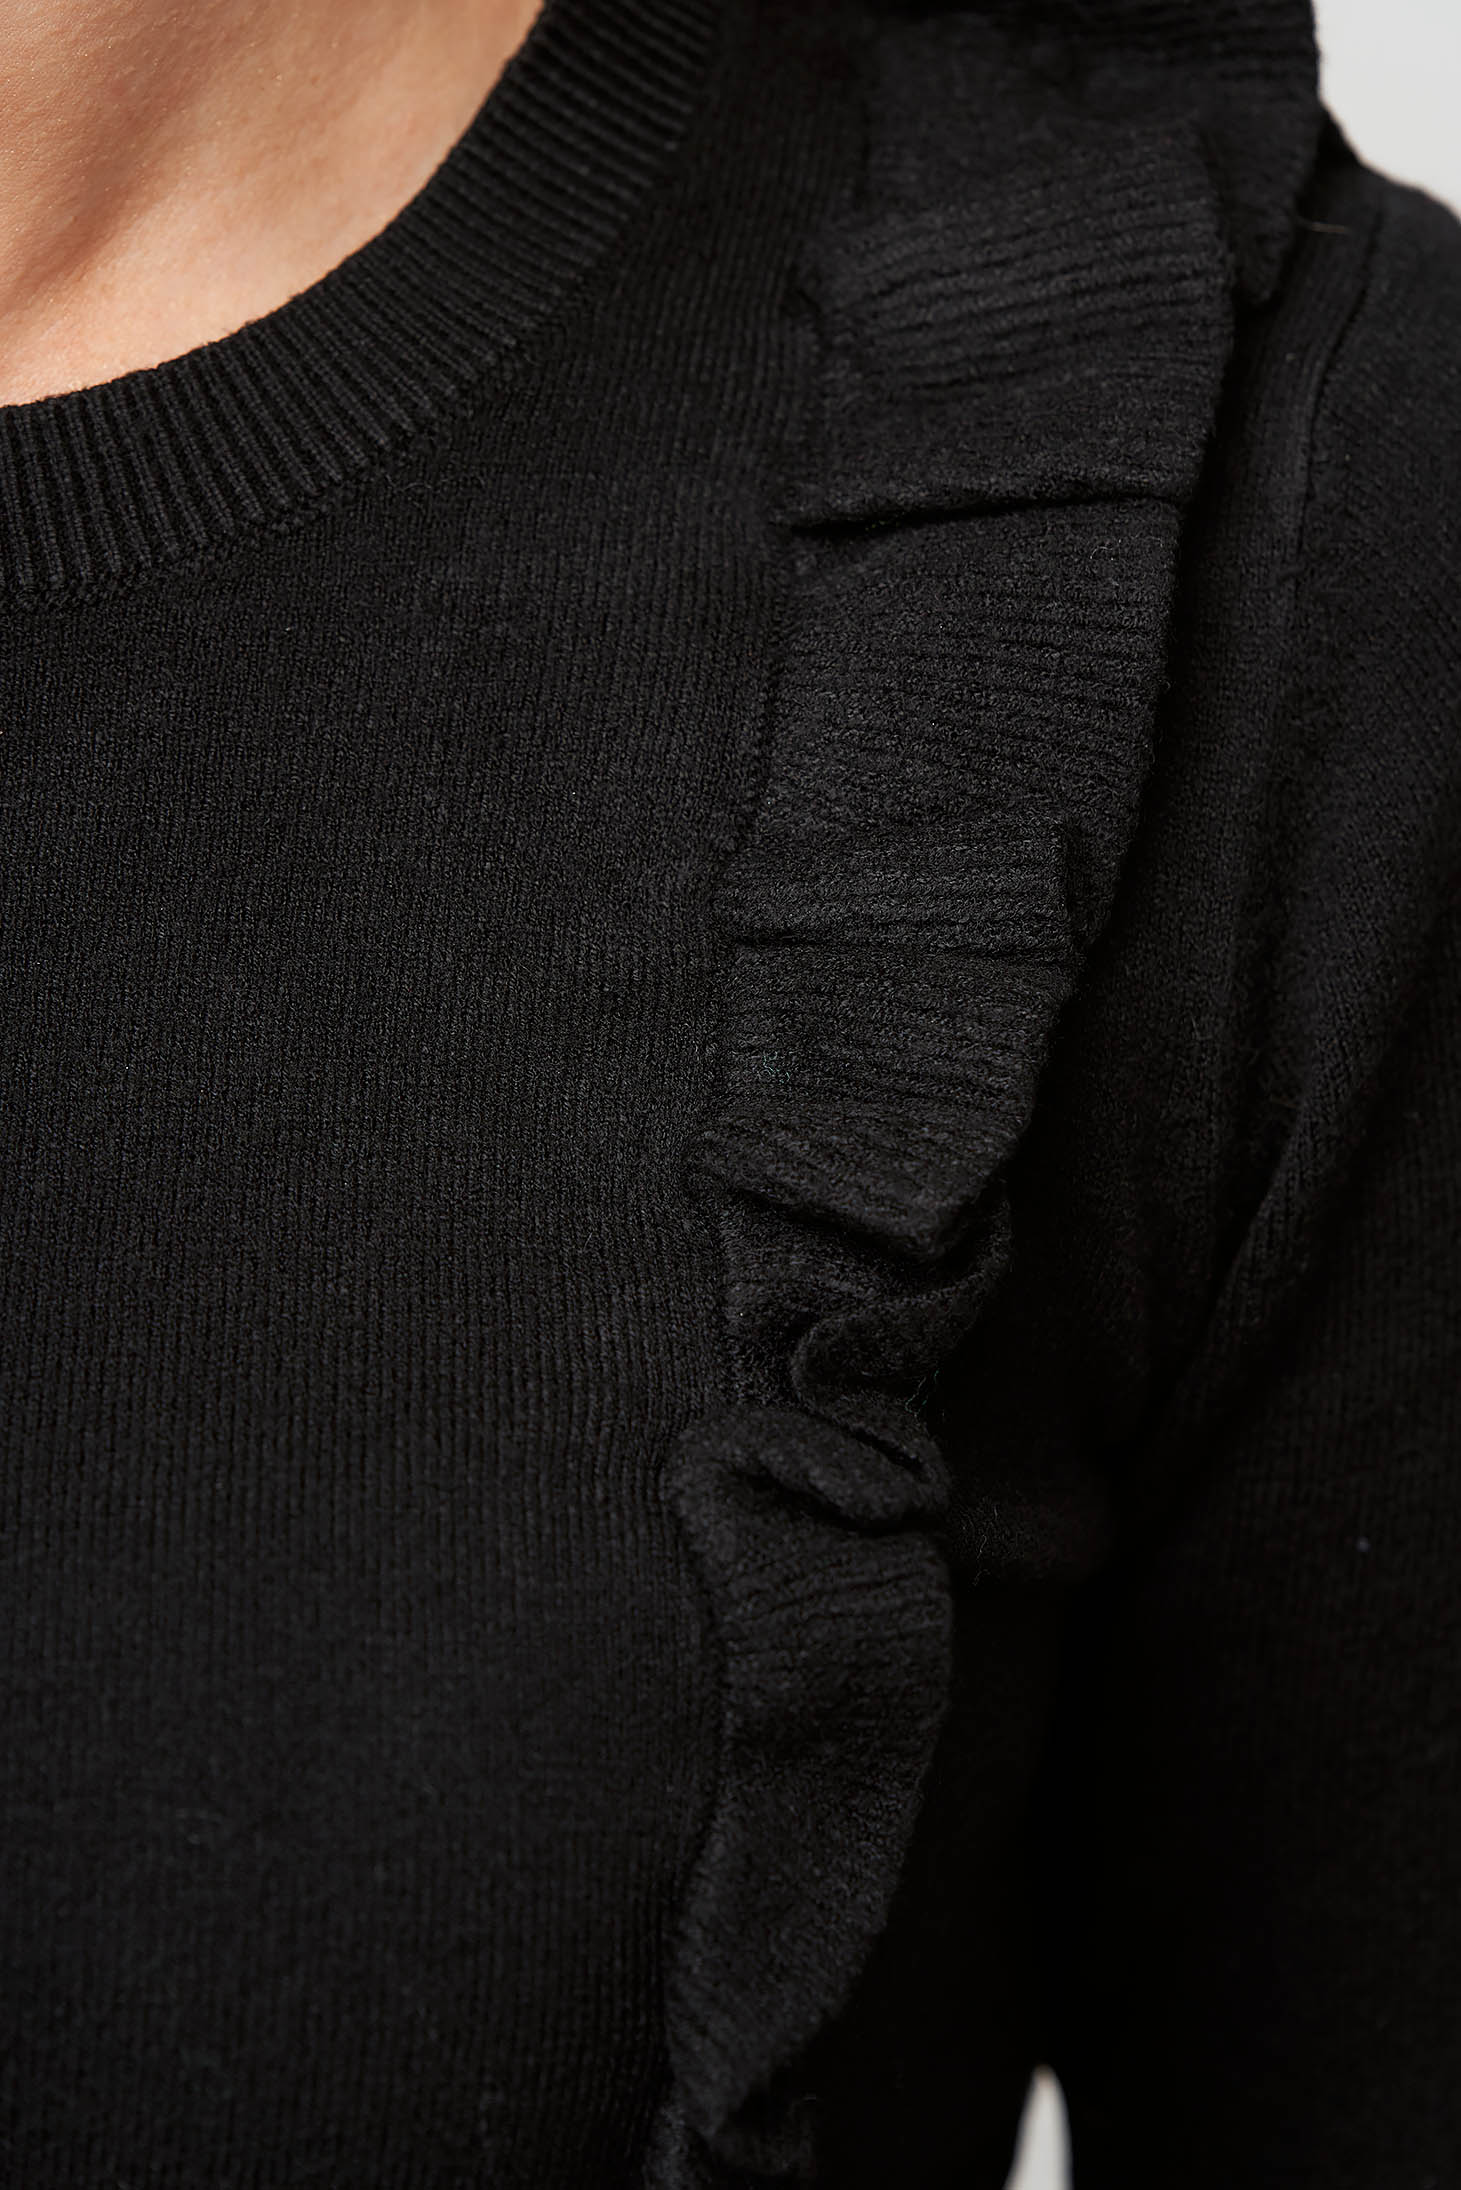 Black sweater knitted tented from soft fabric with ruffle details 5 - StarShinerS.com